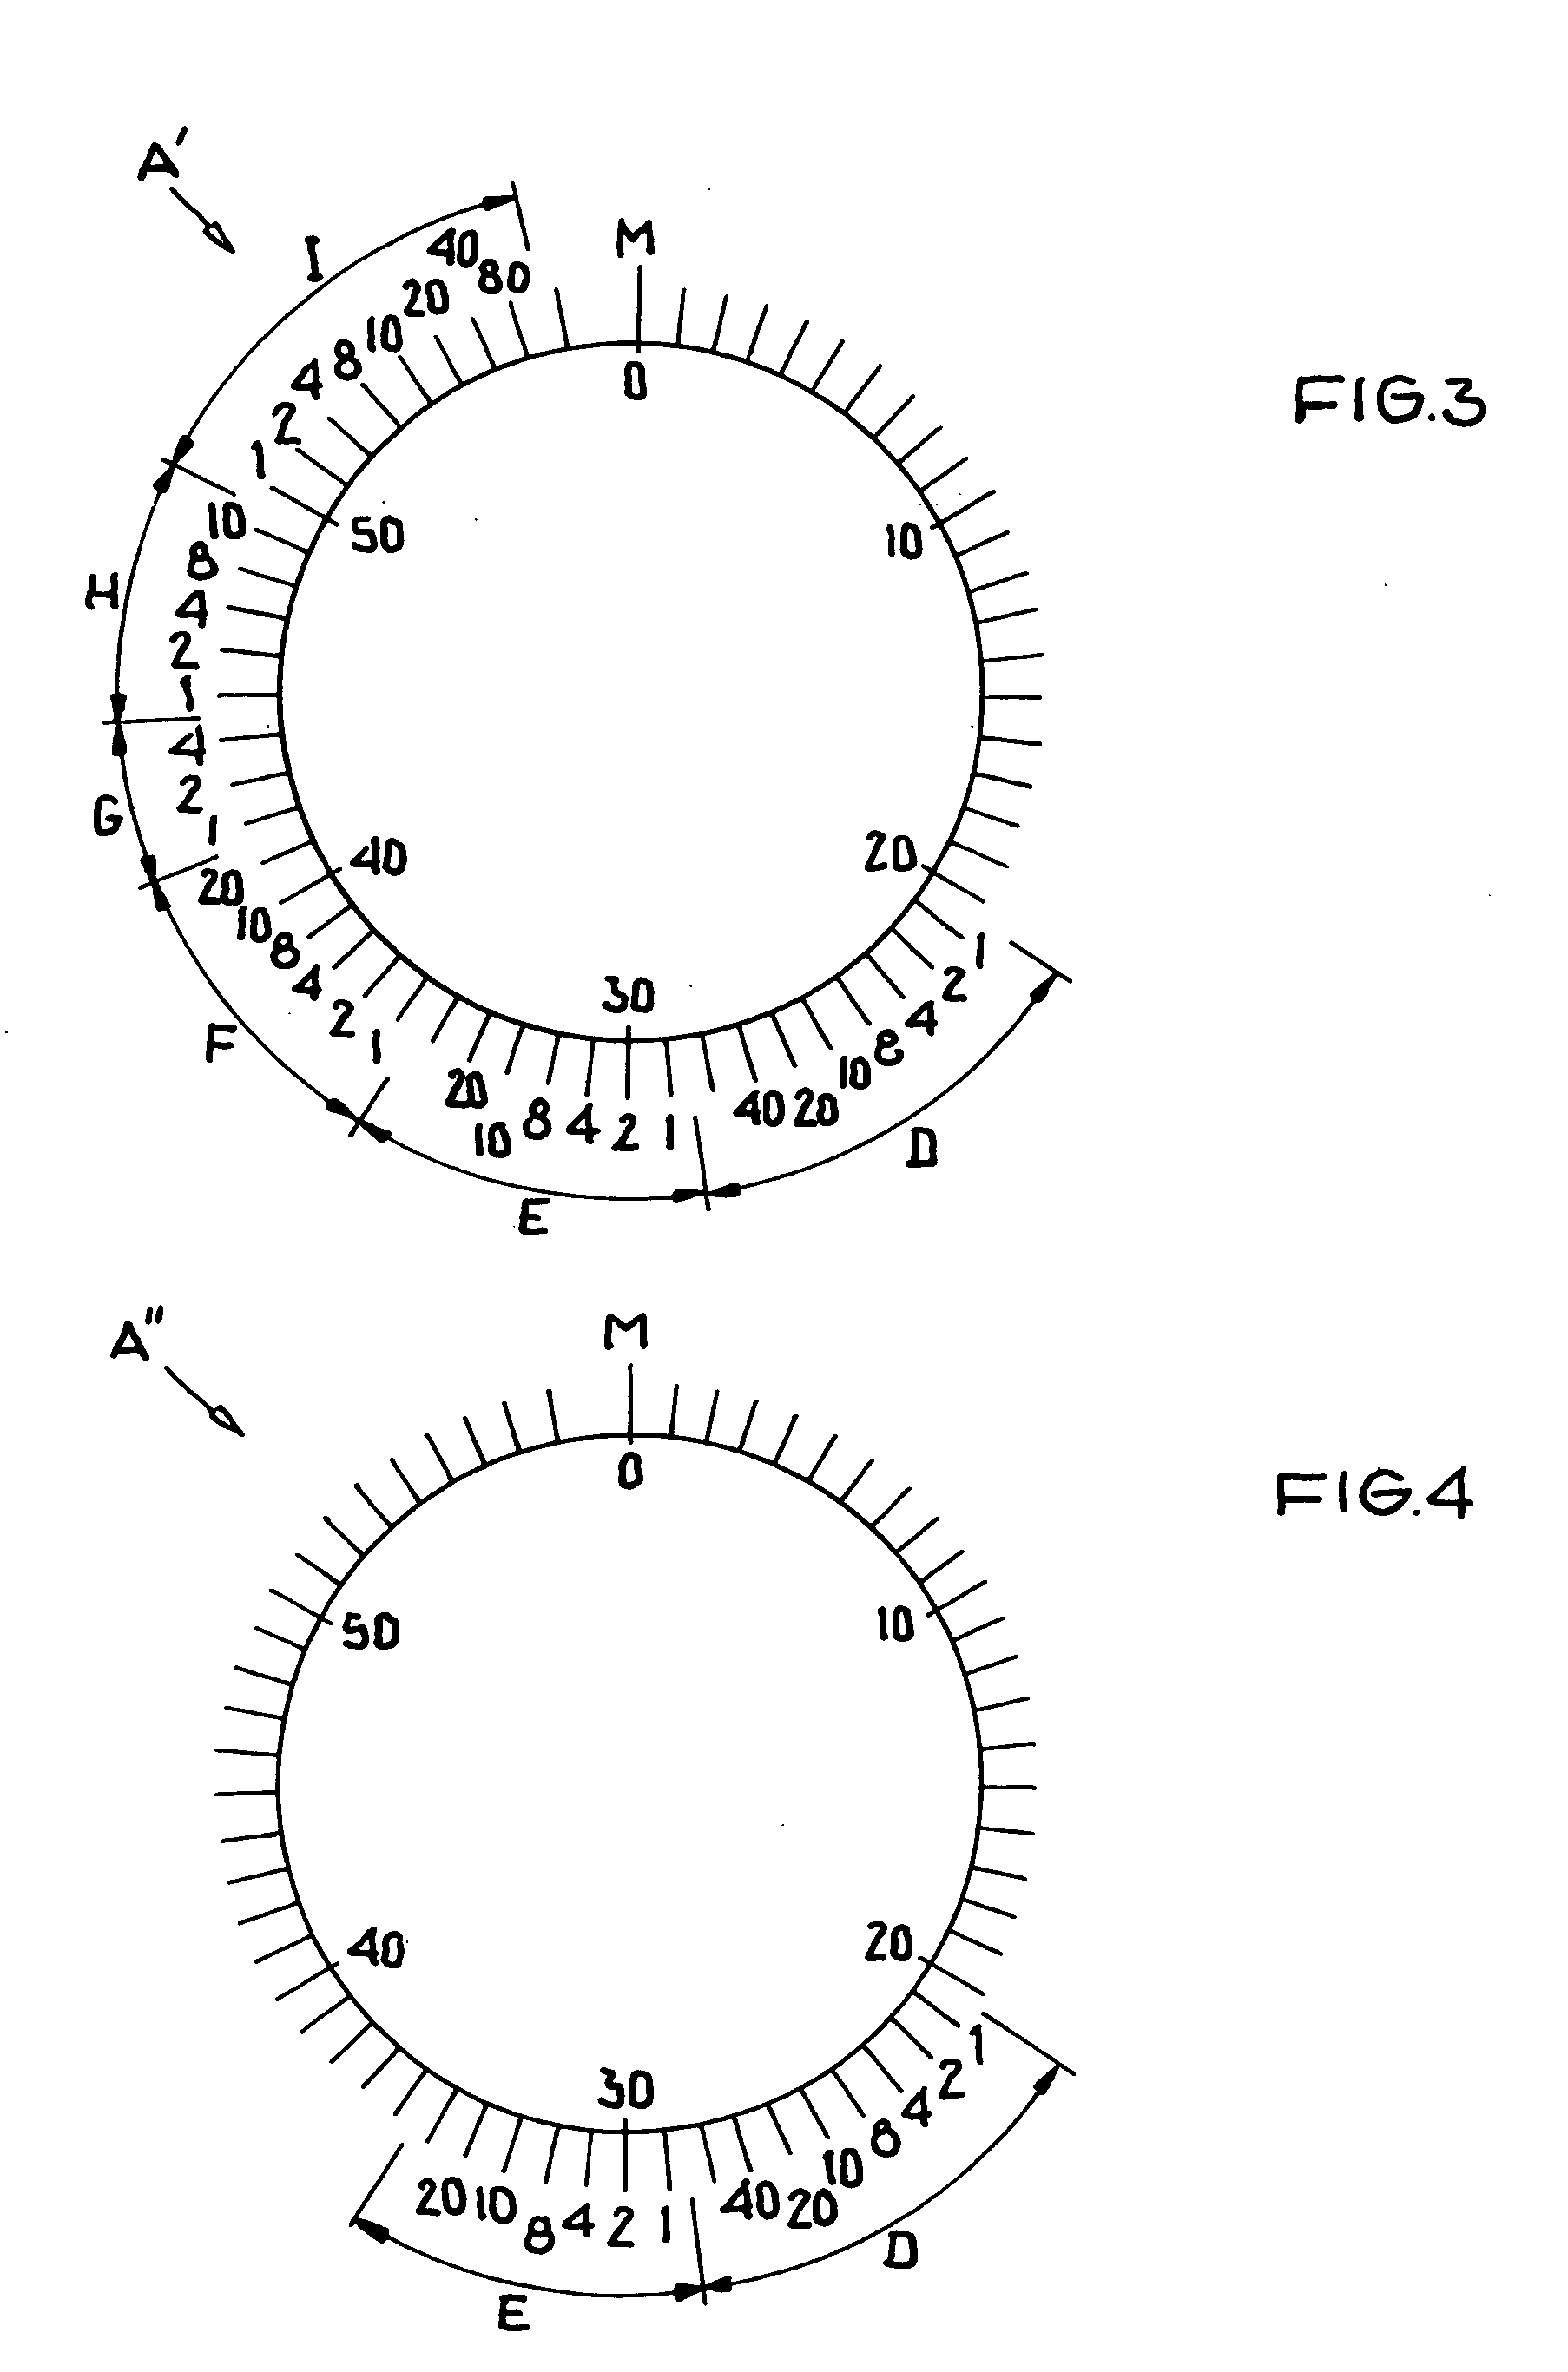 Radio-controlled clock and method for acquiring time information from a time signal with reduced evaluation overhead